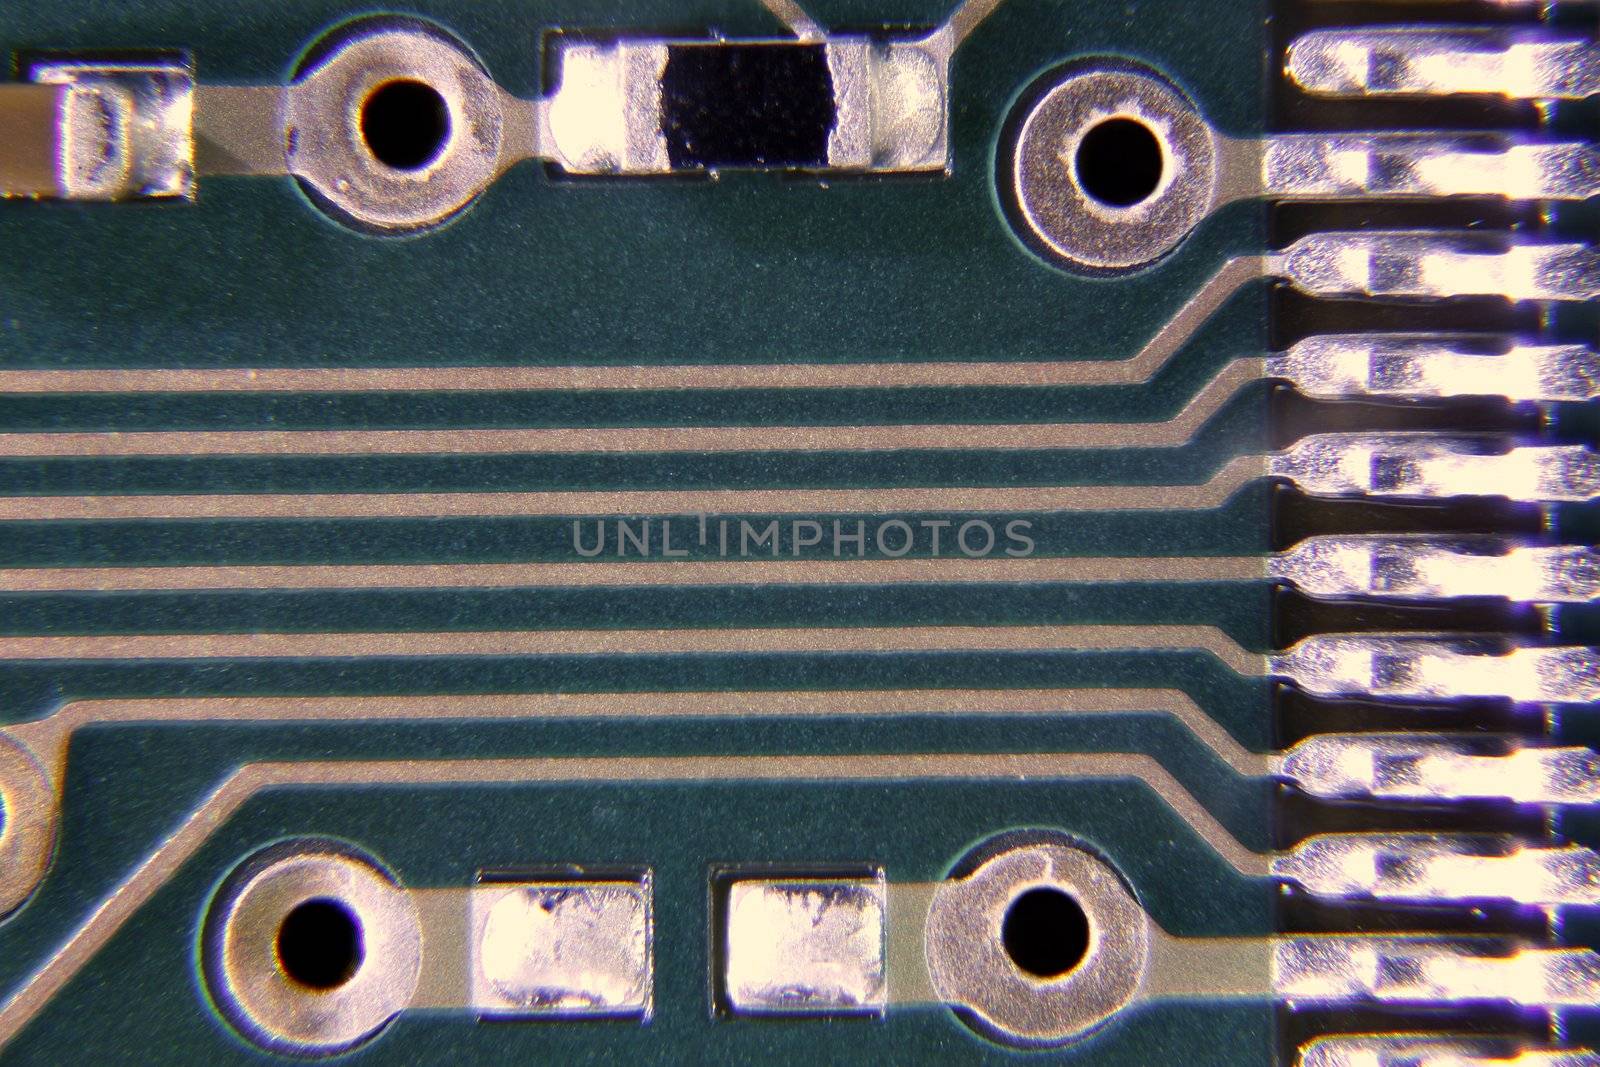 Electronic components taken with compound microscope. Magnification 20X.  Vivid colours can be seen. Images taken using techniques which aid depth of field which otherwise would not be possible with this kind of microscopic photography.